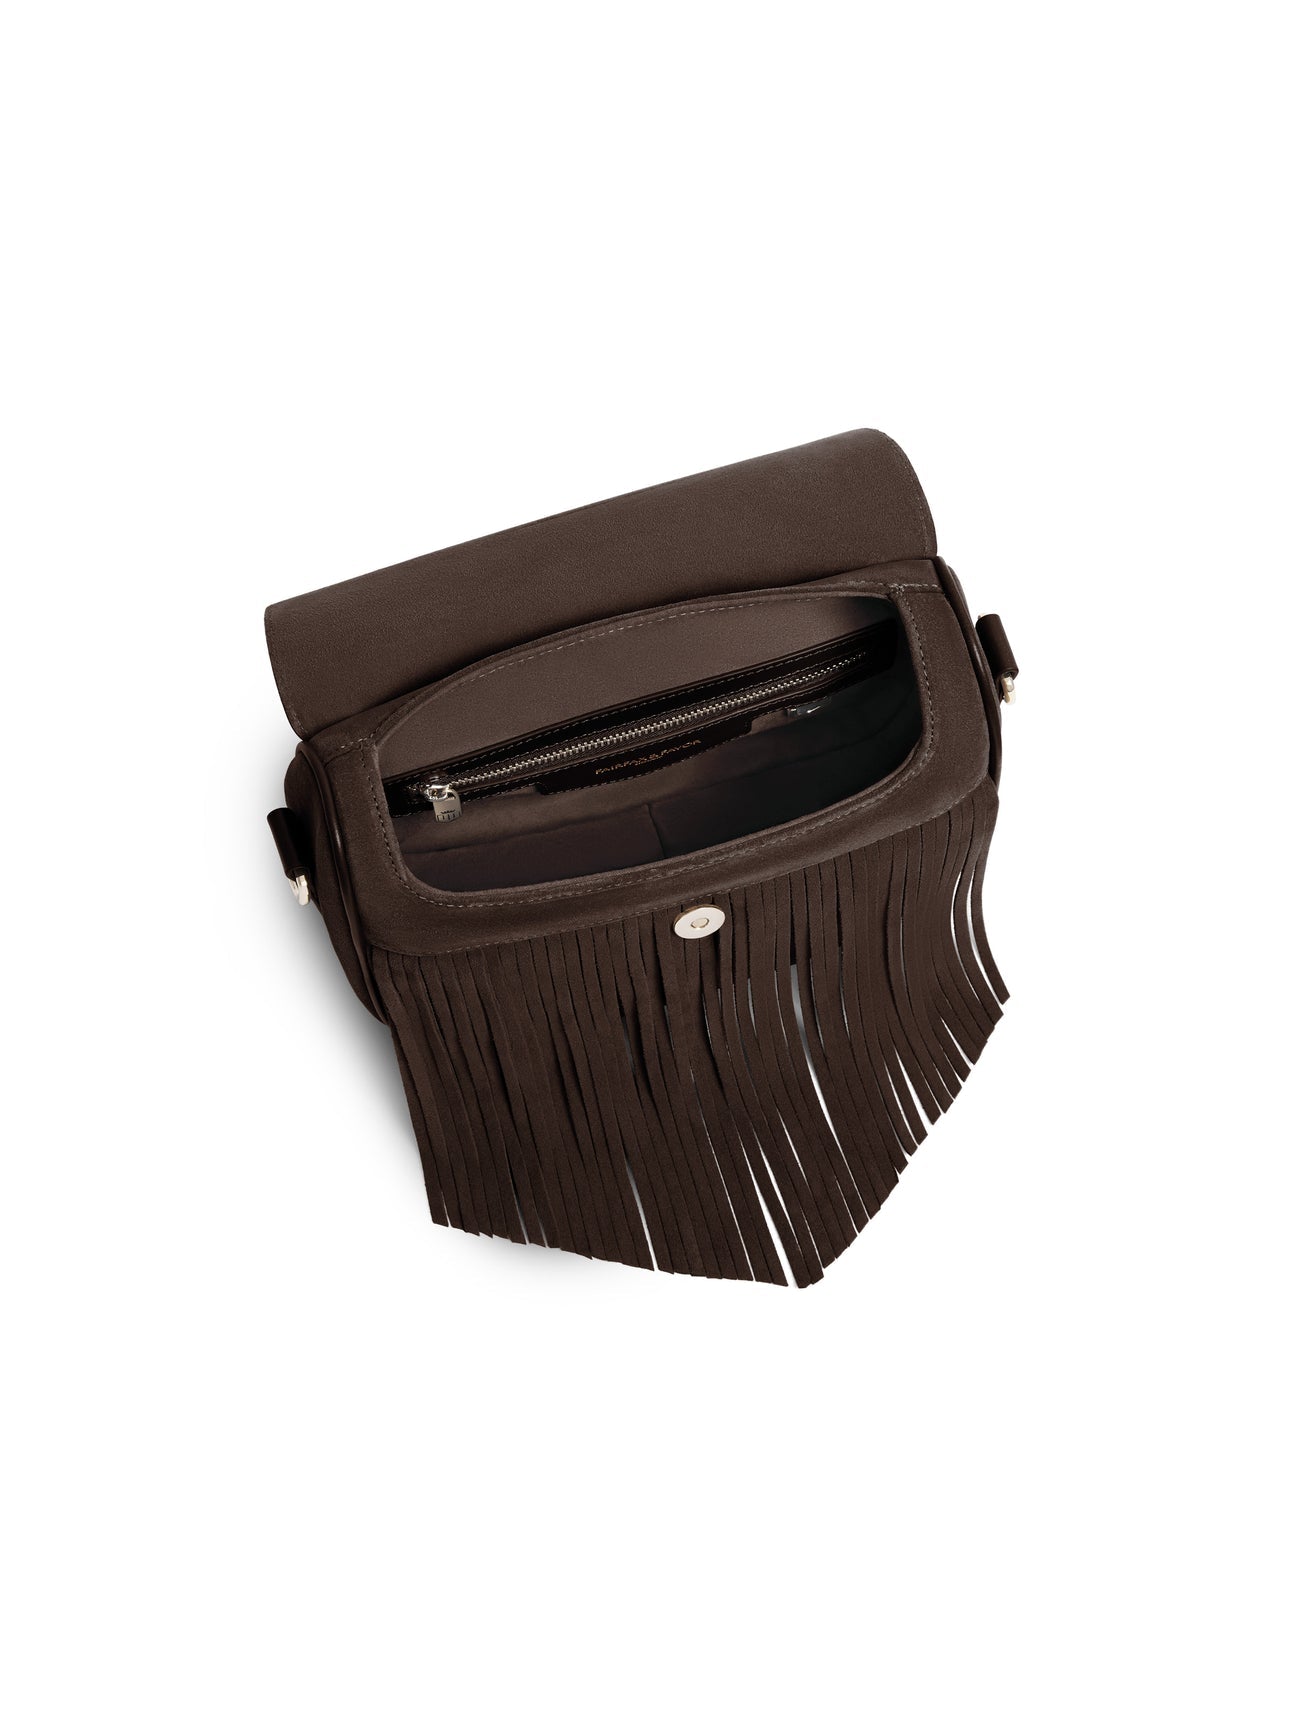 The Nashville
Women's Bag - Fringed Chocolate Suede